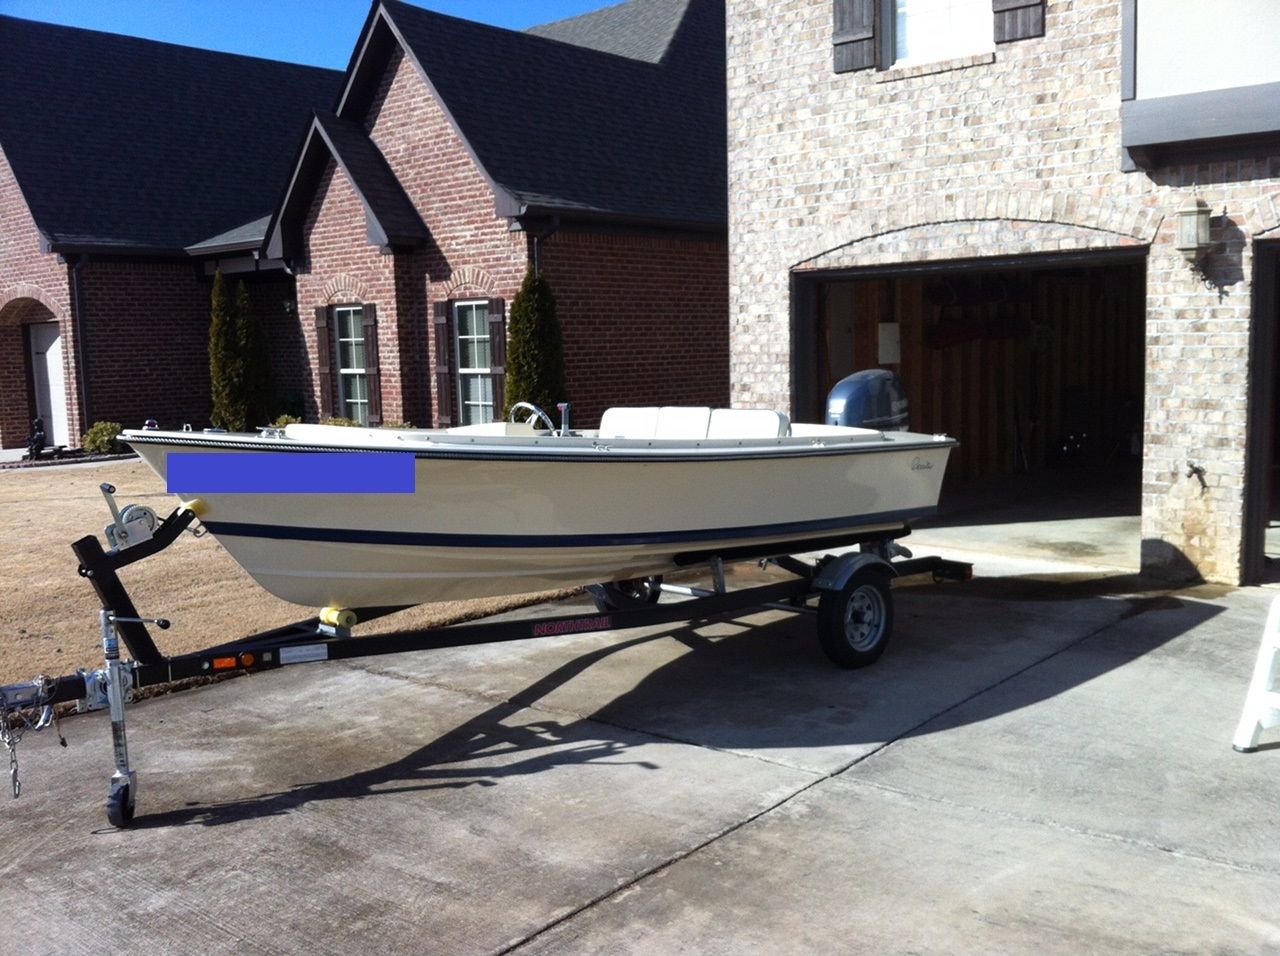 Rossiter 14 2012 for sale for $17,500 - Boats-from-USA.com